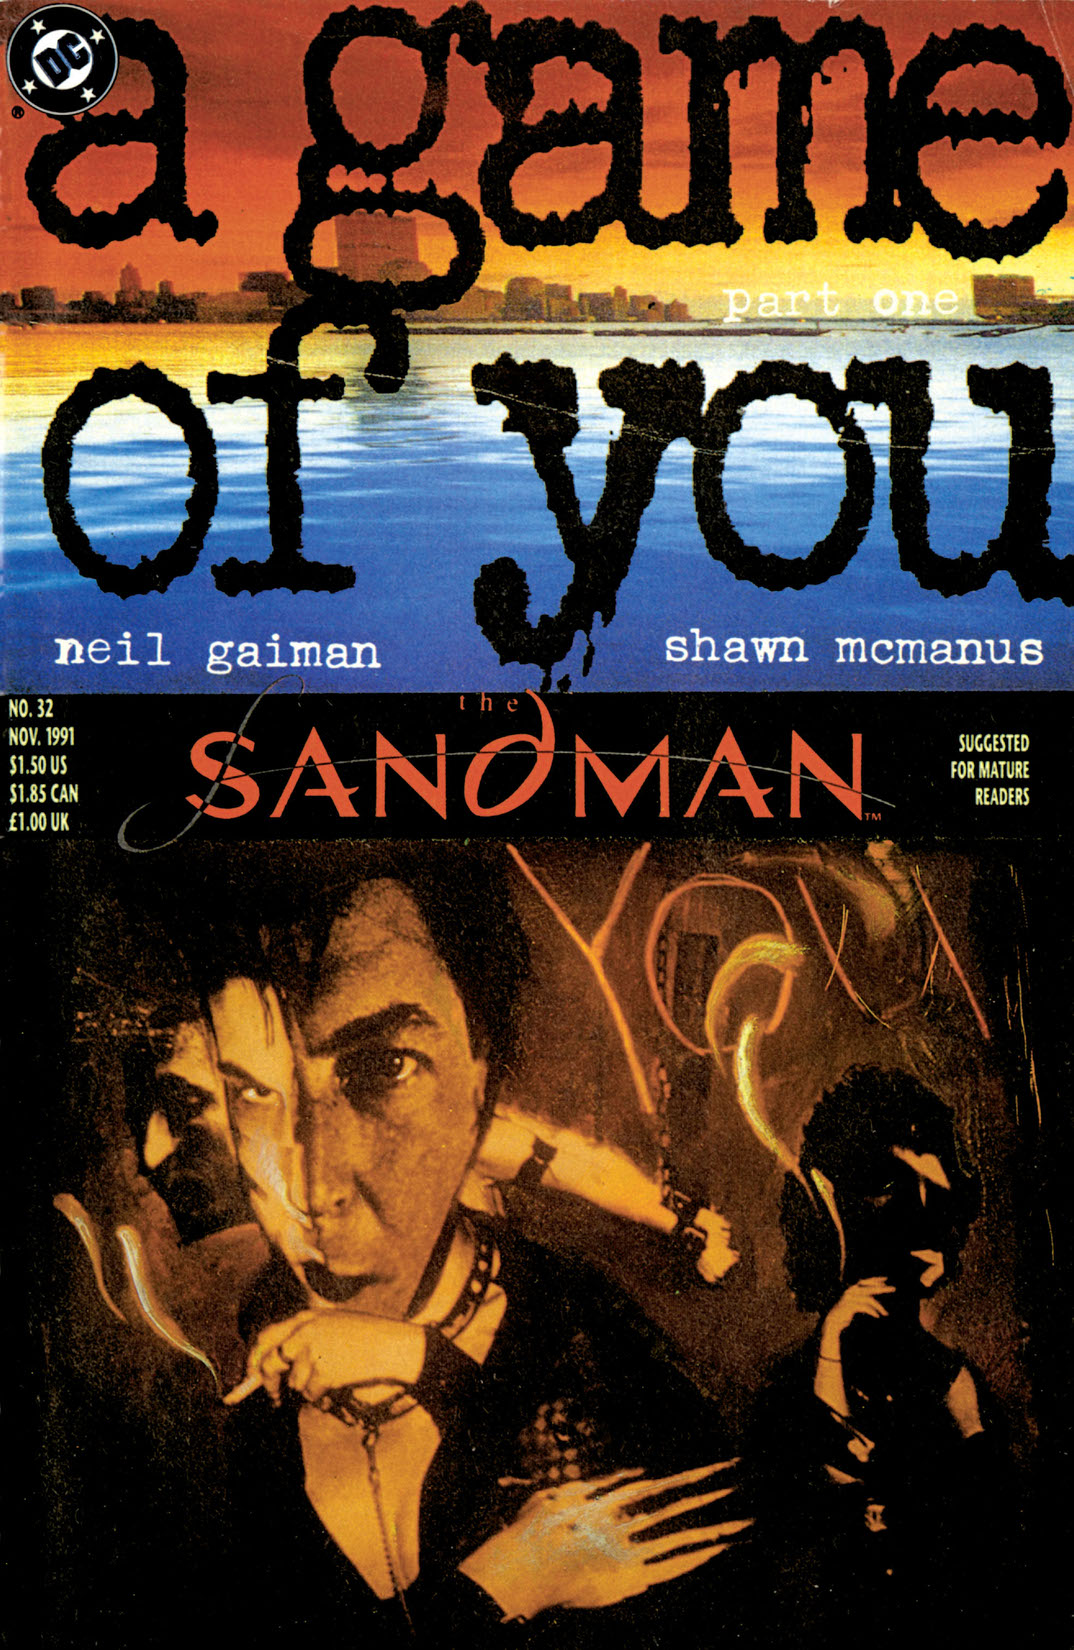 The Sandman #32 preview images